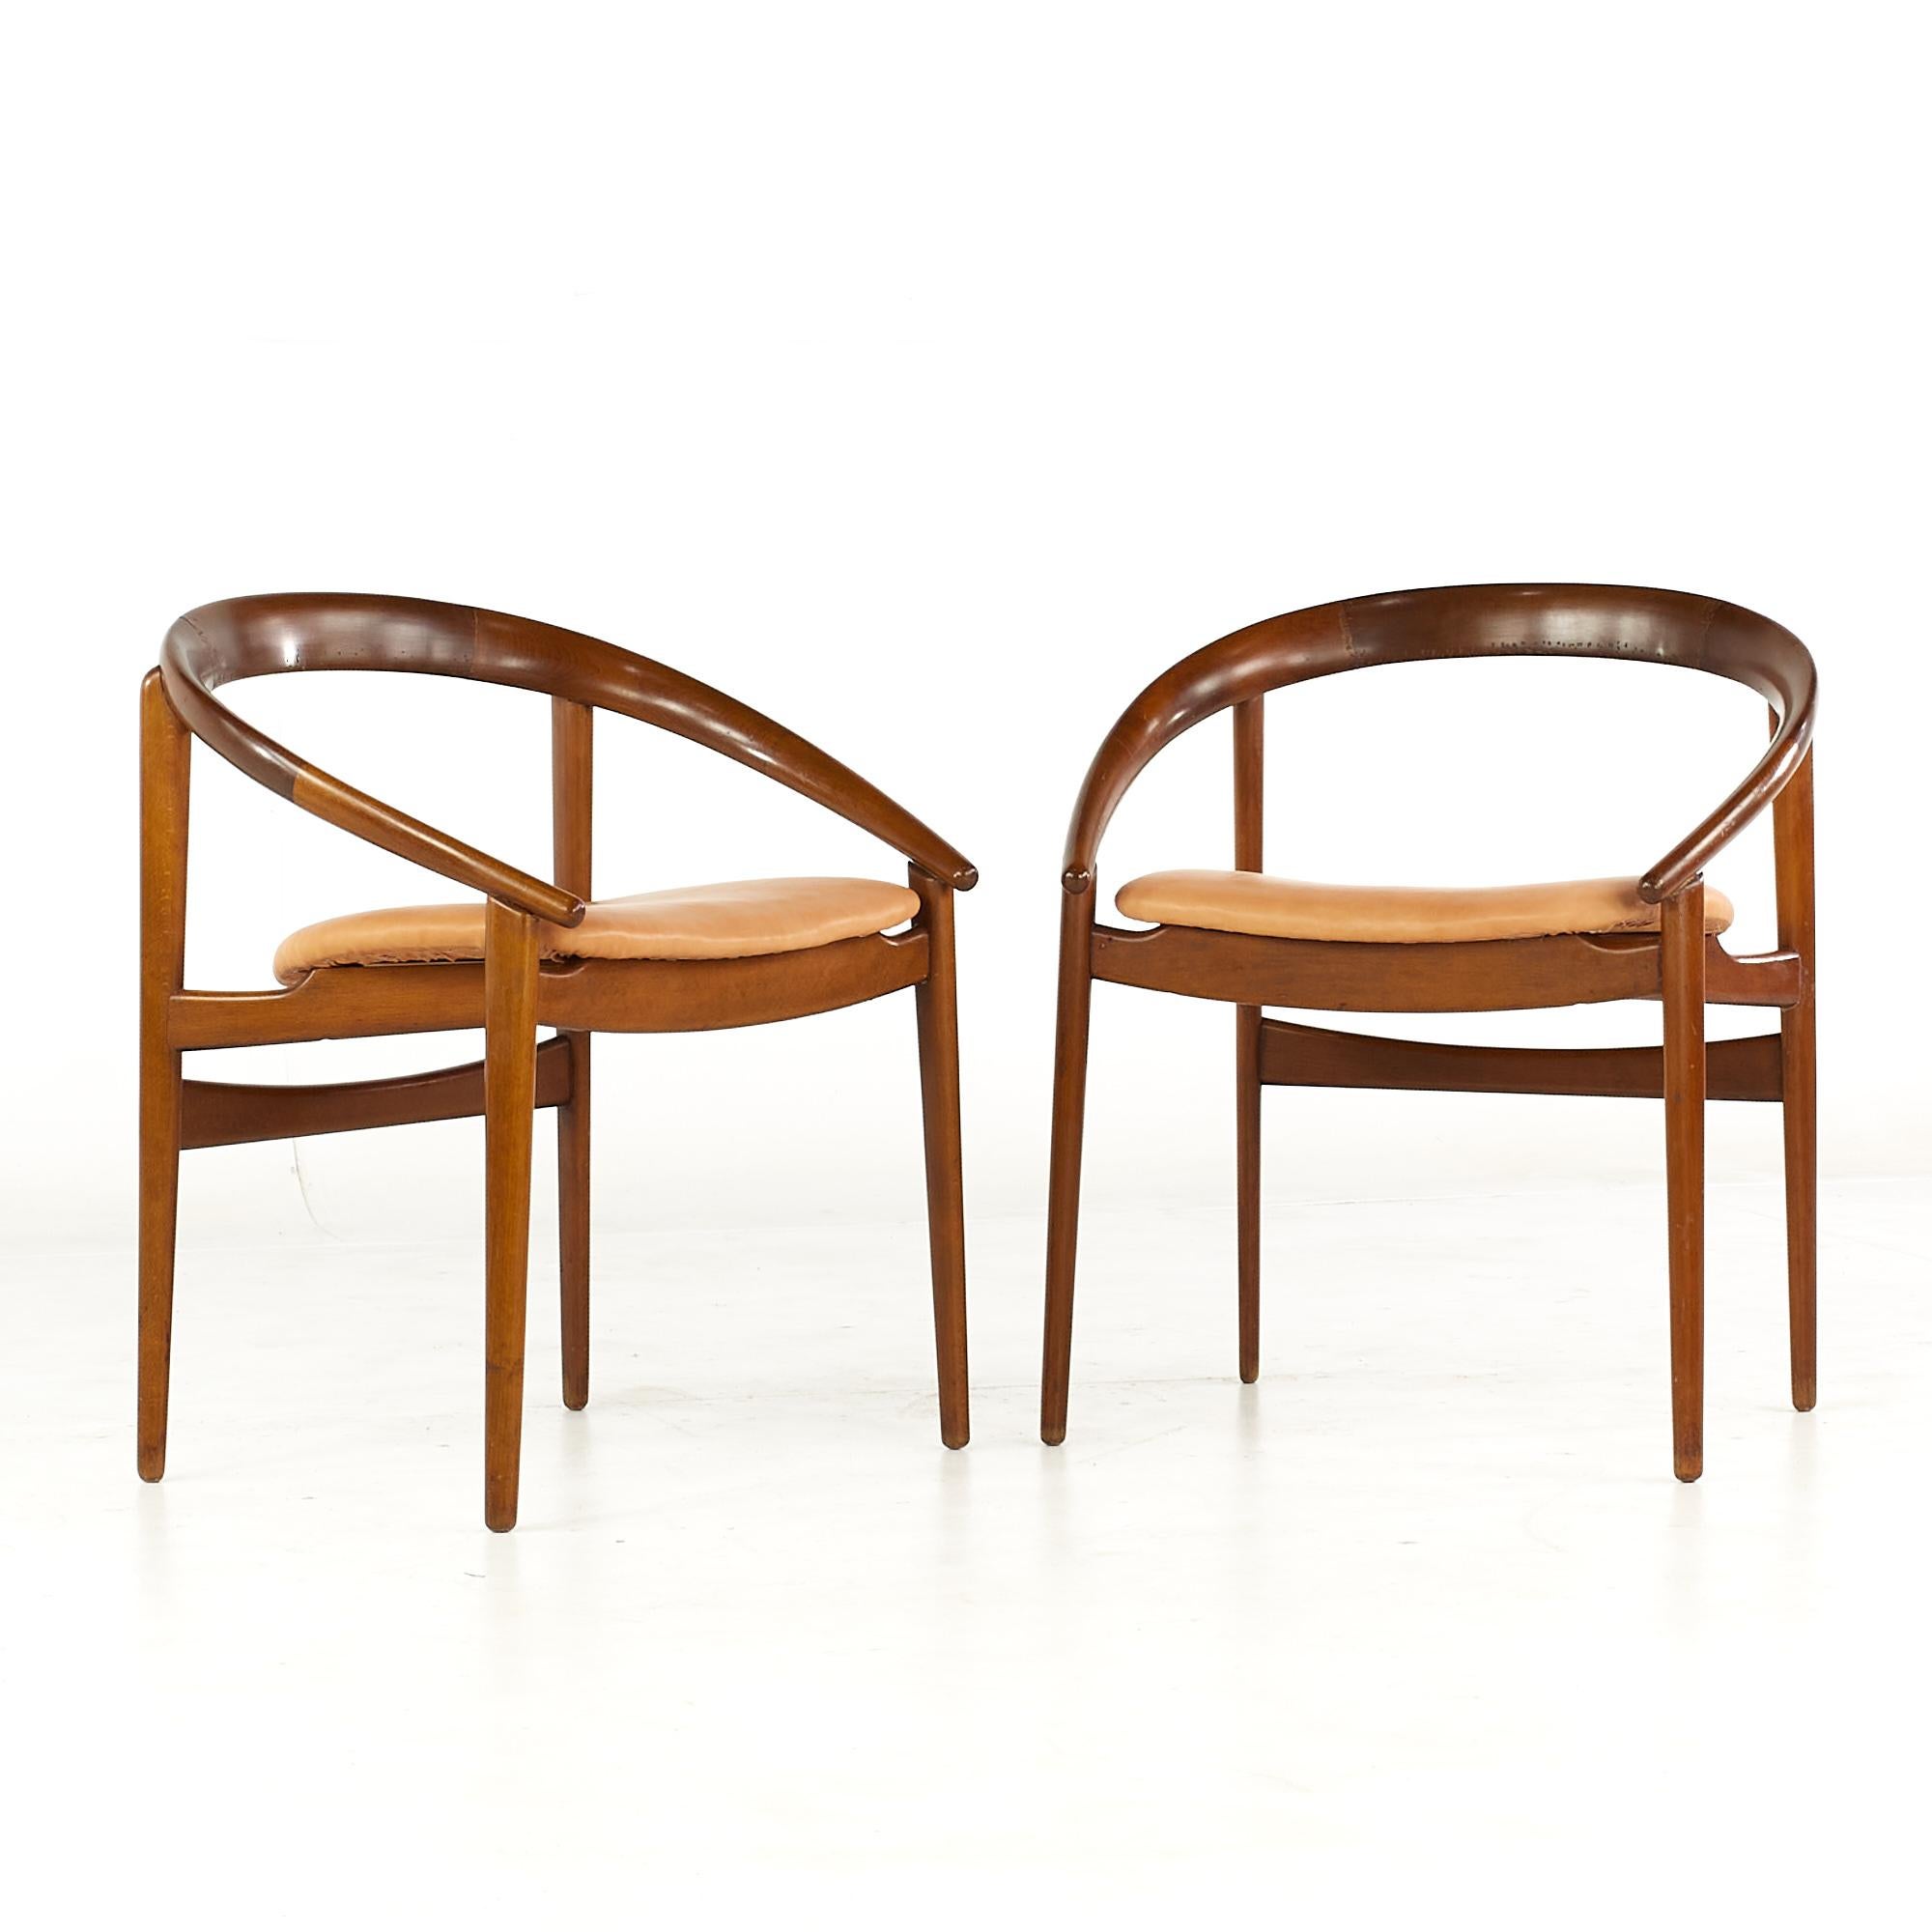 H Brockmann Petersen for Louis G Thiersen mid century Teak Horseshoe Chairs - Pair.

Each chair measures: 23 wide x 18 deep x 27 high, with a seat height of 18 and arm height/chair clearance 22 inches.

All pieces of furniture can be had in what